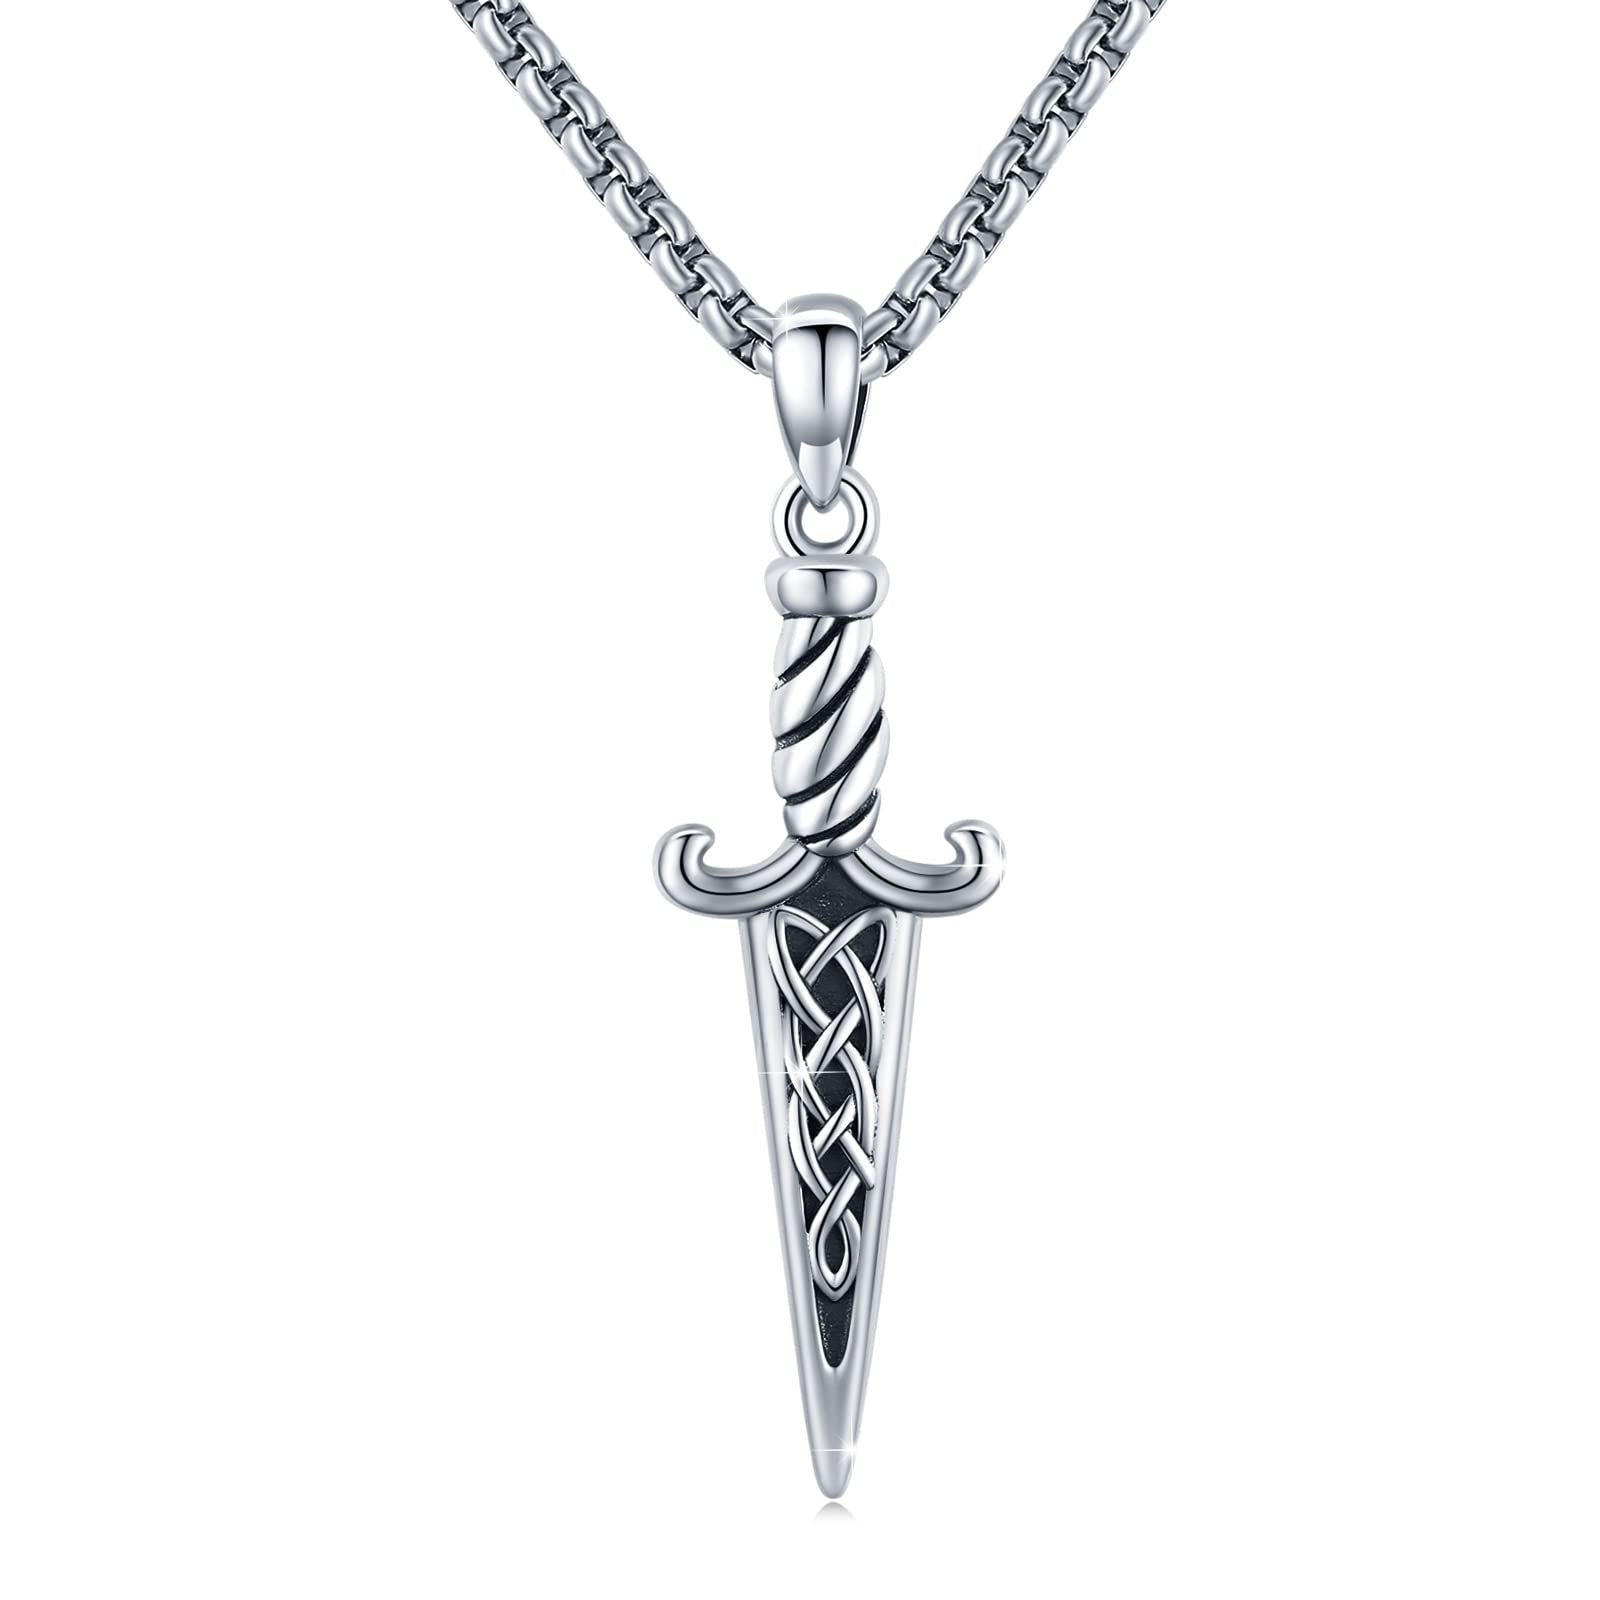 Silver Celtic-style Double-Edged Dagger Pendant Necklace Jewelry